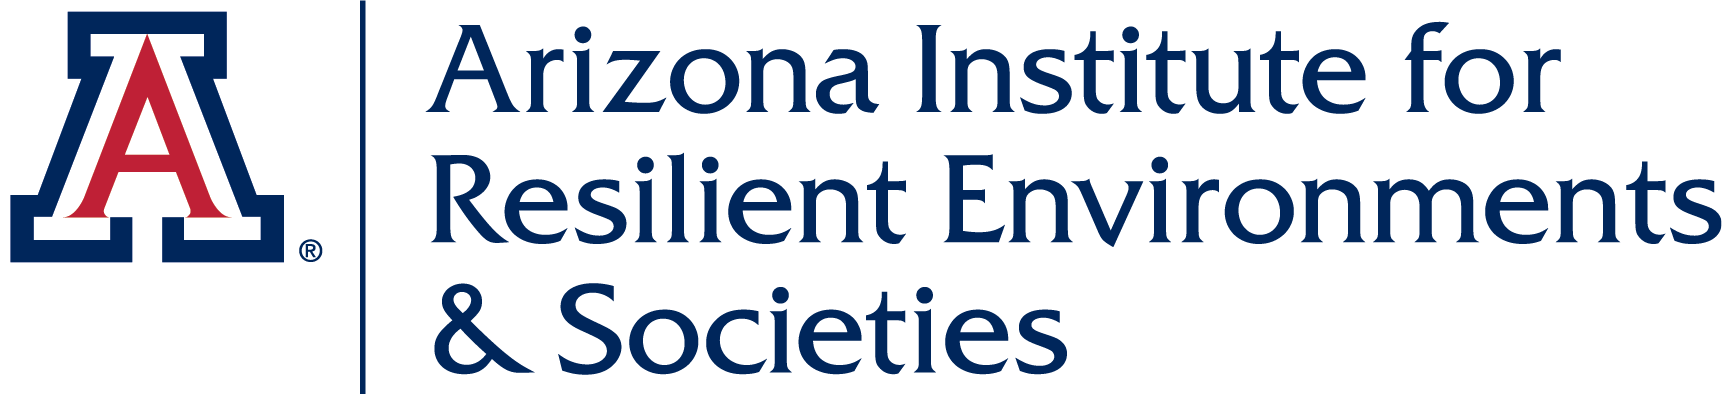 Arizona Institute for Resilient Environments and Societies logo